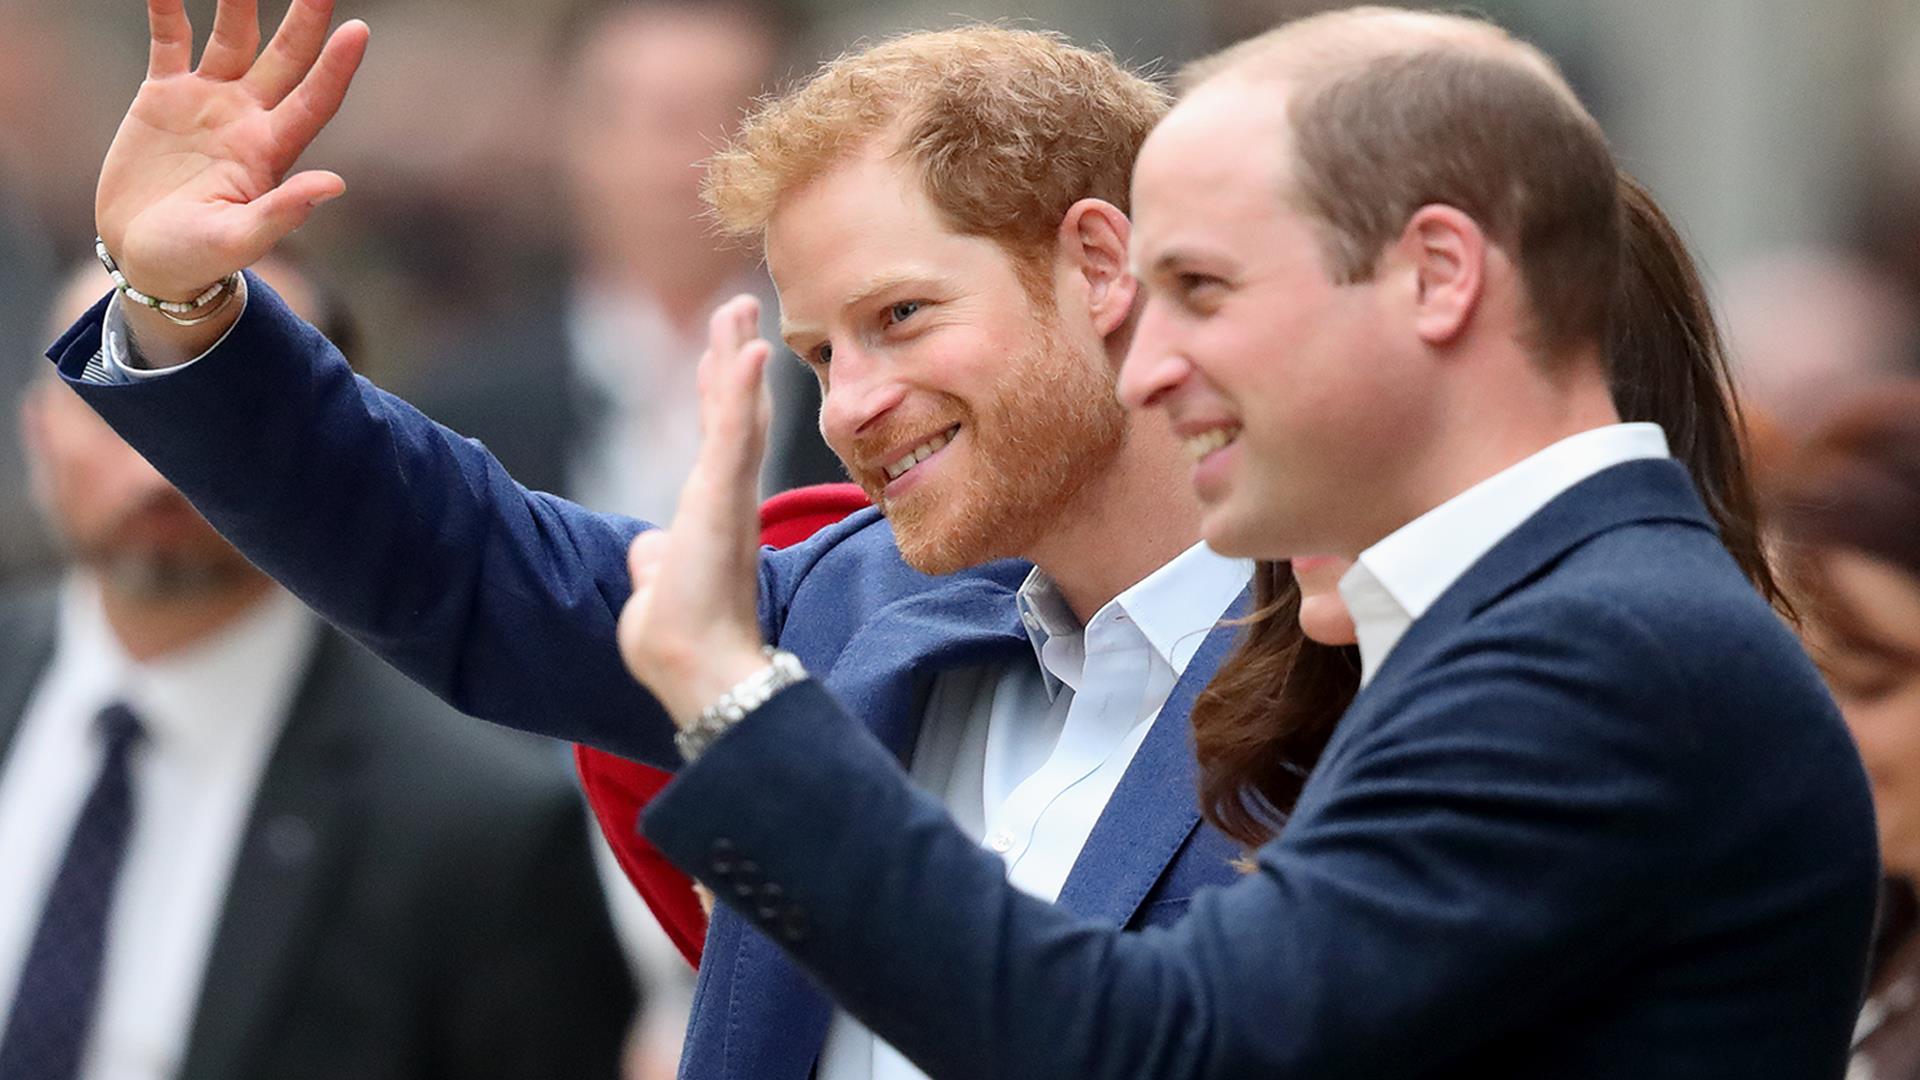 Brotherly love! See Prince William and Prince Harry's sweetest